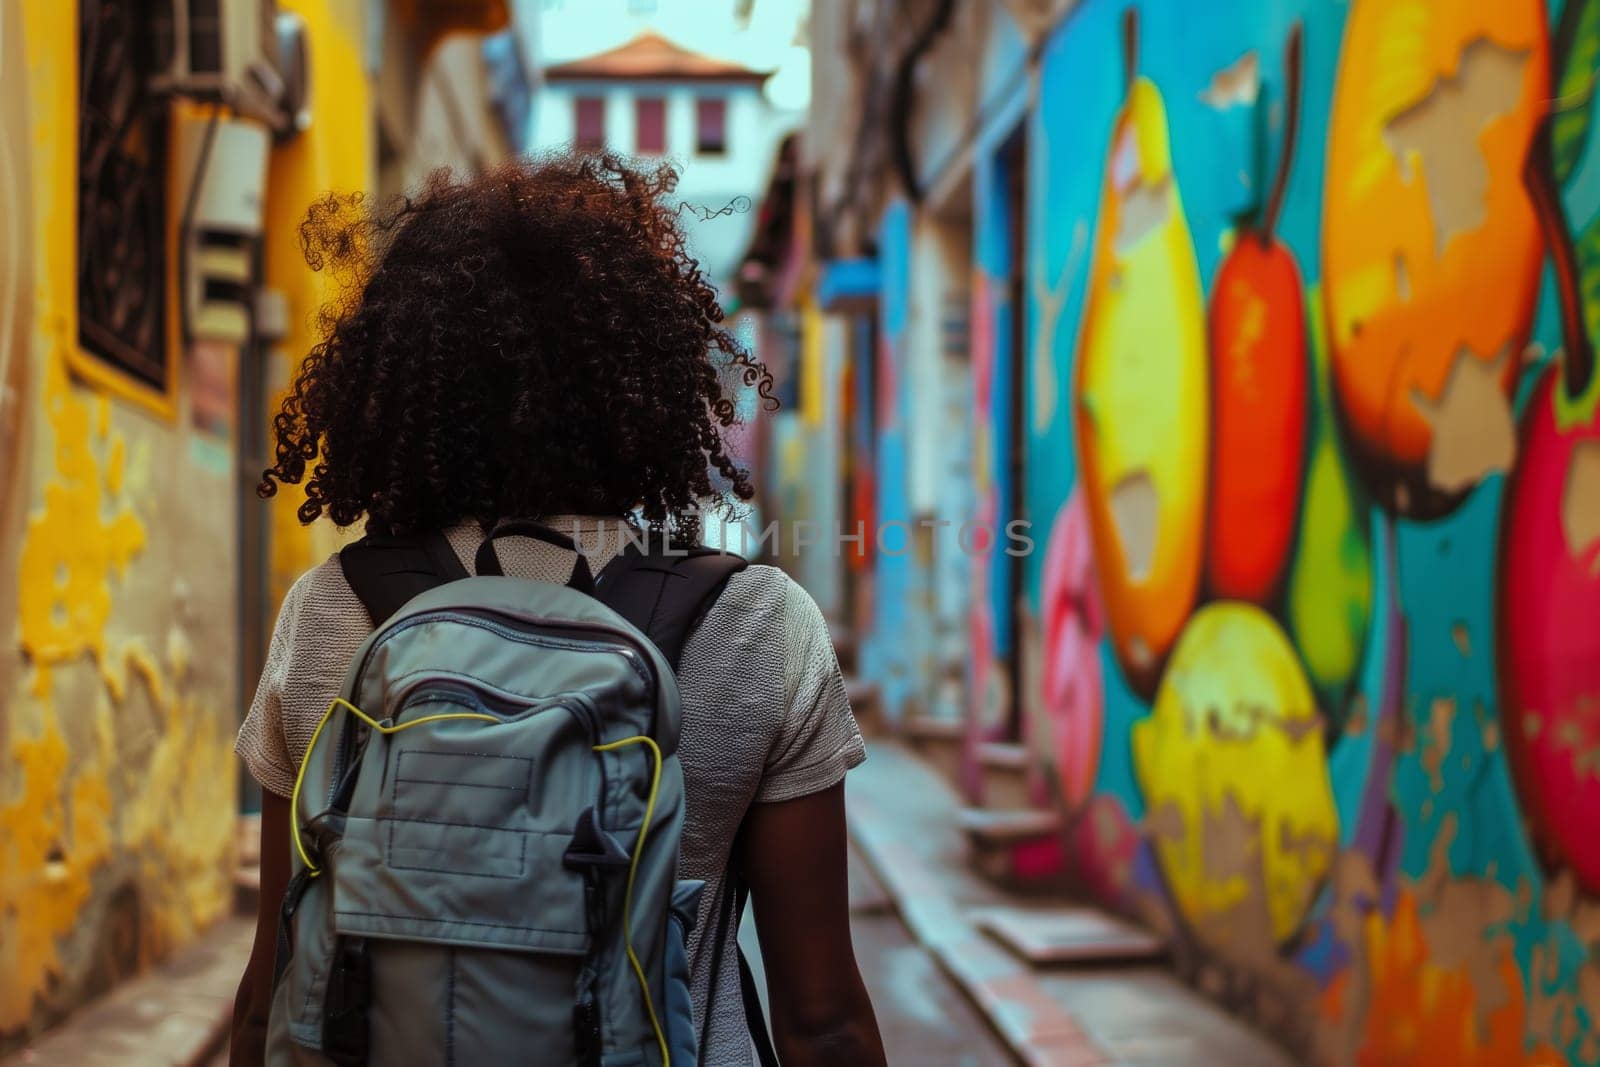 A man wearing a yellow tshirt is strolling down a city alleyway with his travel backpack, enjoying the art and leisure of the narrow road